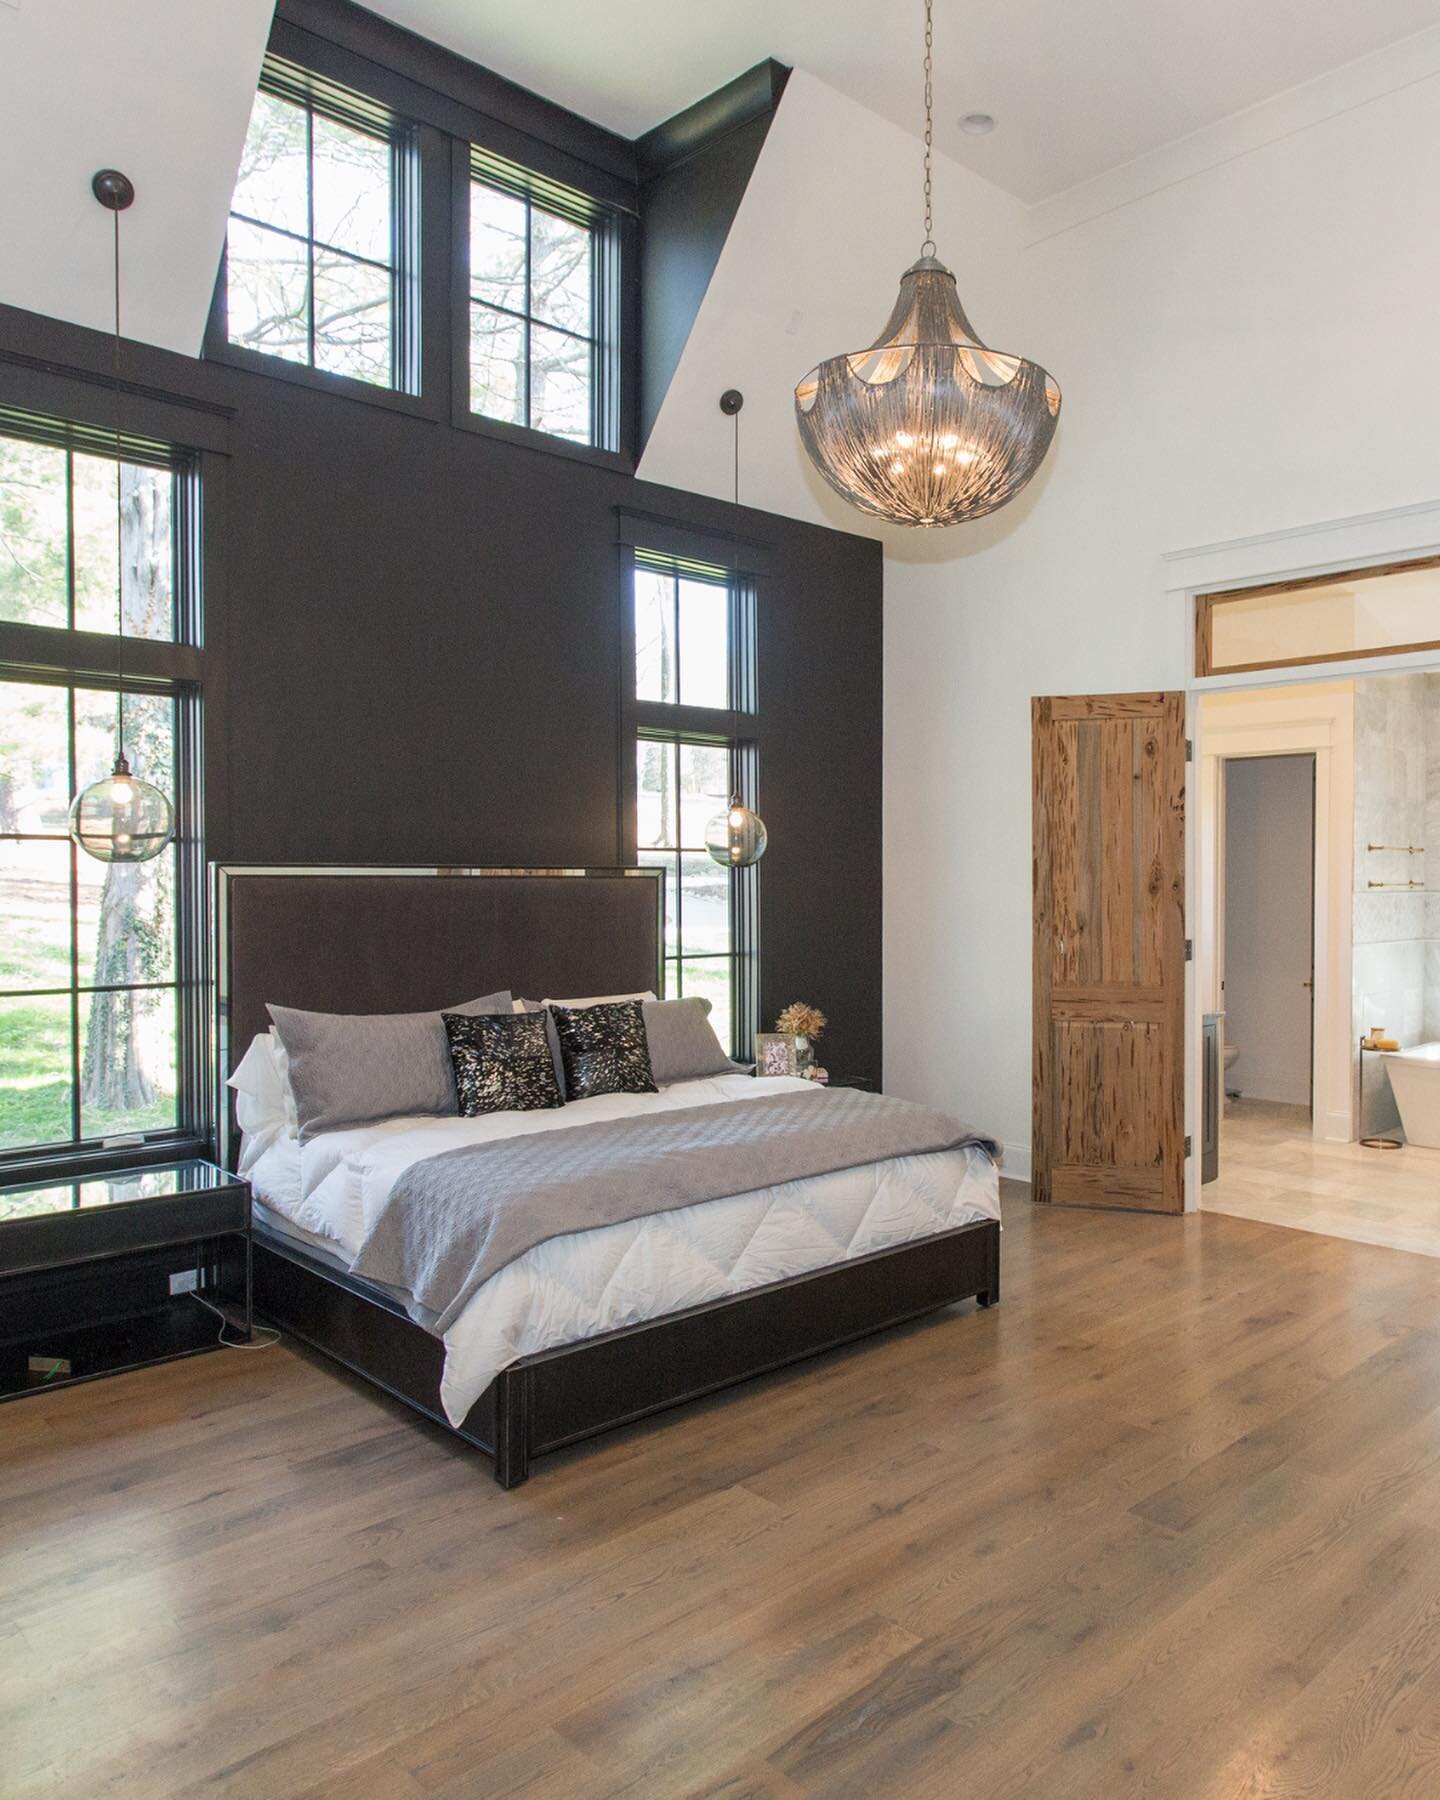 Step into this suite! The high ceilings &amp; custom accent wall lead to a cozy master bath.
.
.
#nashvillehomes #nashvilleluxuryhomes #luxuryhome #designinspo #exteriordesign #housegoals #designinspo #luxurybuilder #customconstruction #custombuild #